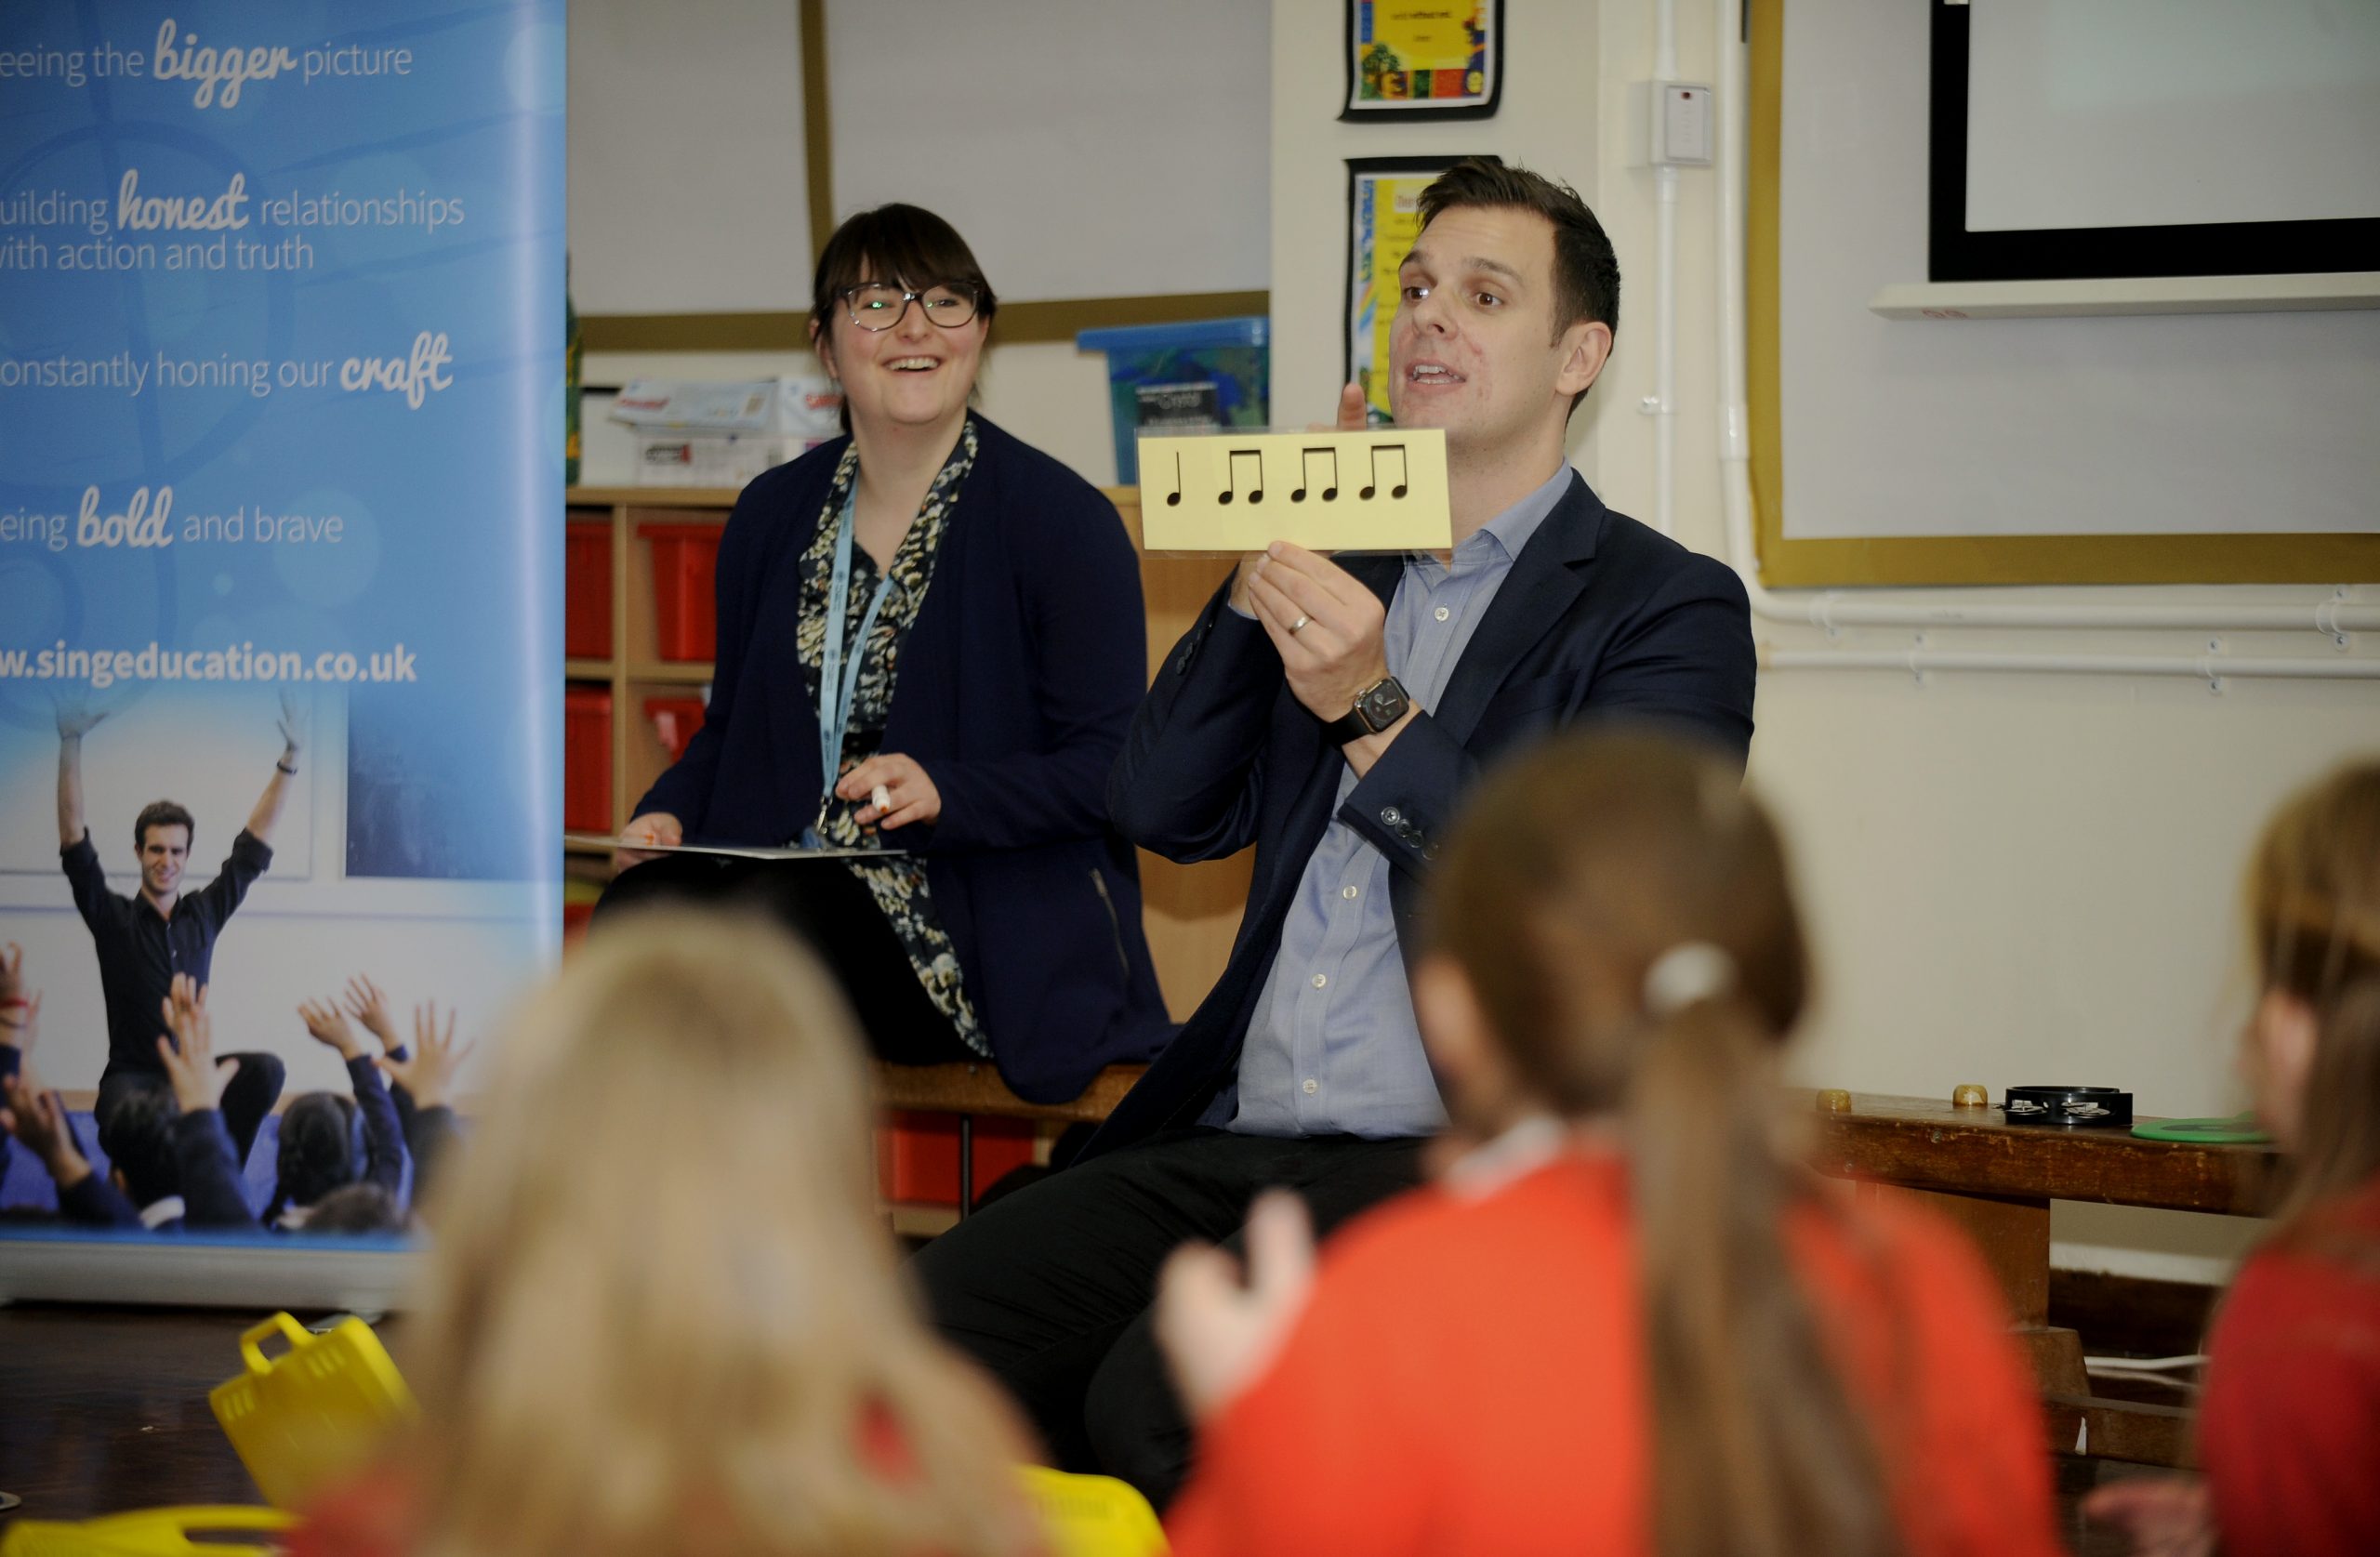 Sing Education teacher is using flashcards to teach music at St George's Primary School